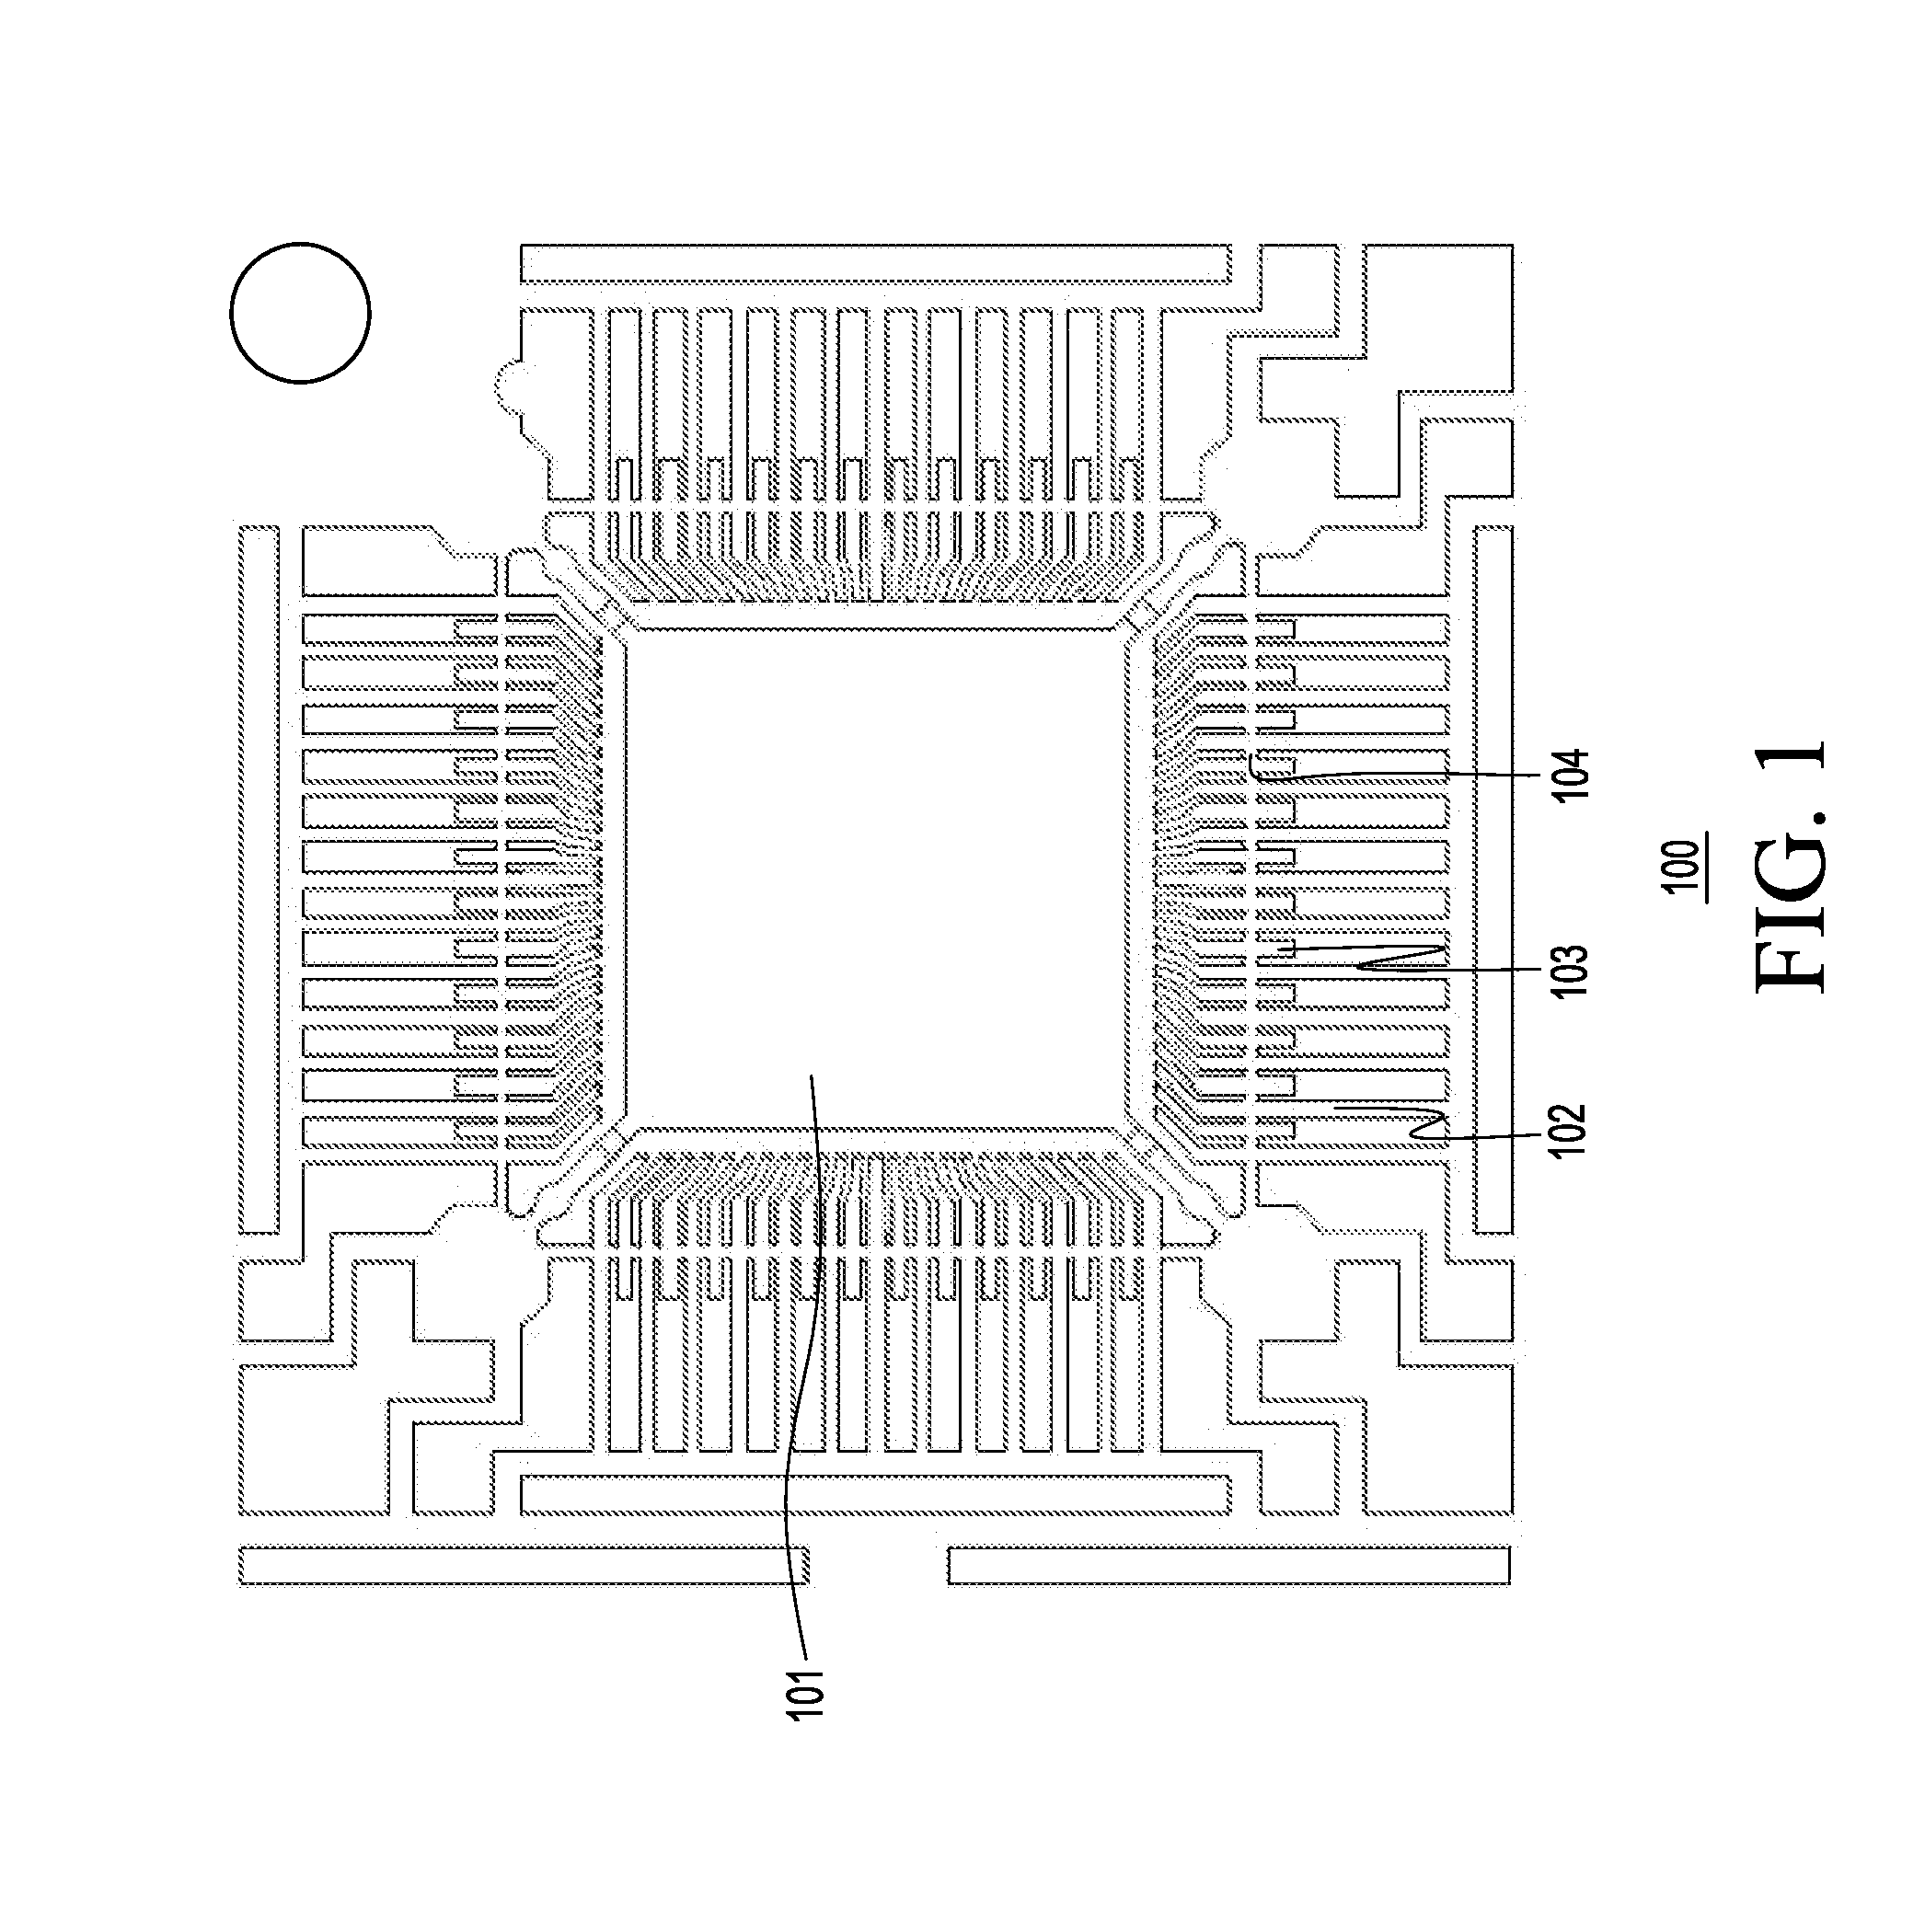 Semiconductor device with webbing between leads